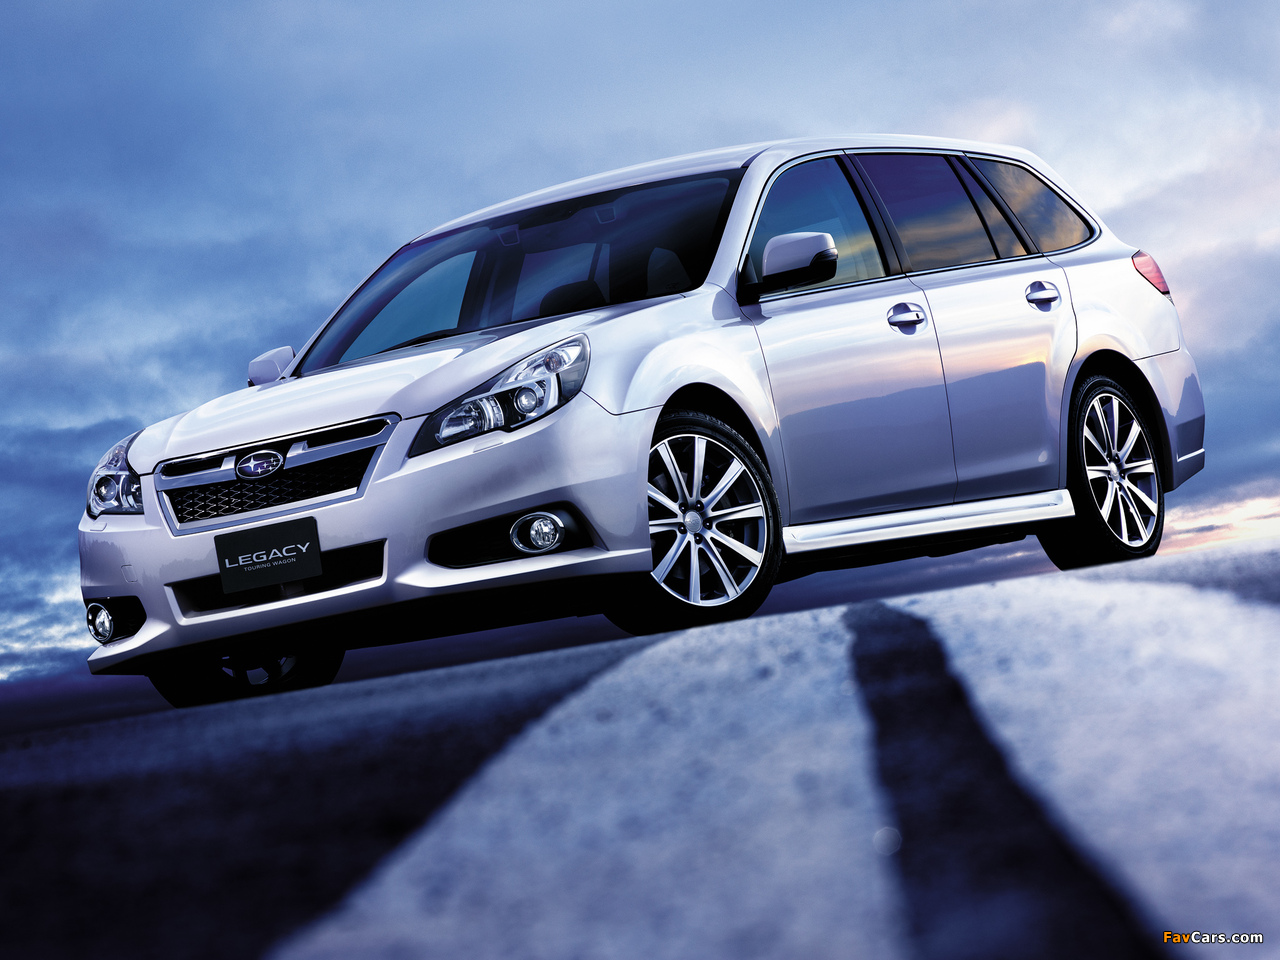 Subaru Legacy 2.5i-S Touring Wagon (BR) 2012 pictures (1280 x 960)